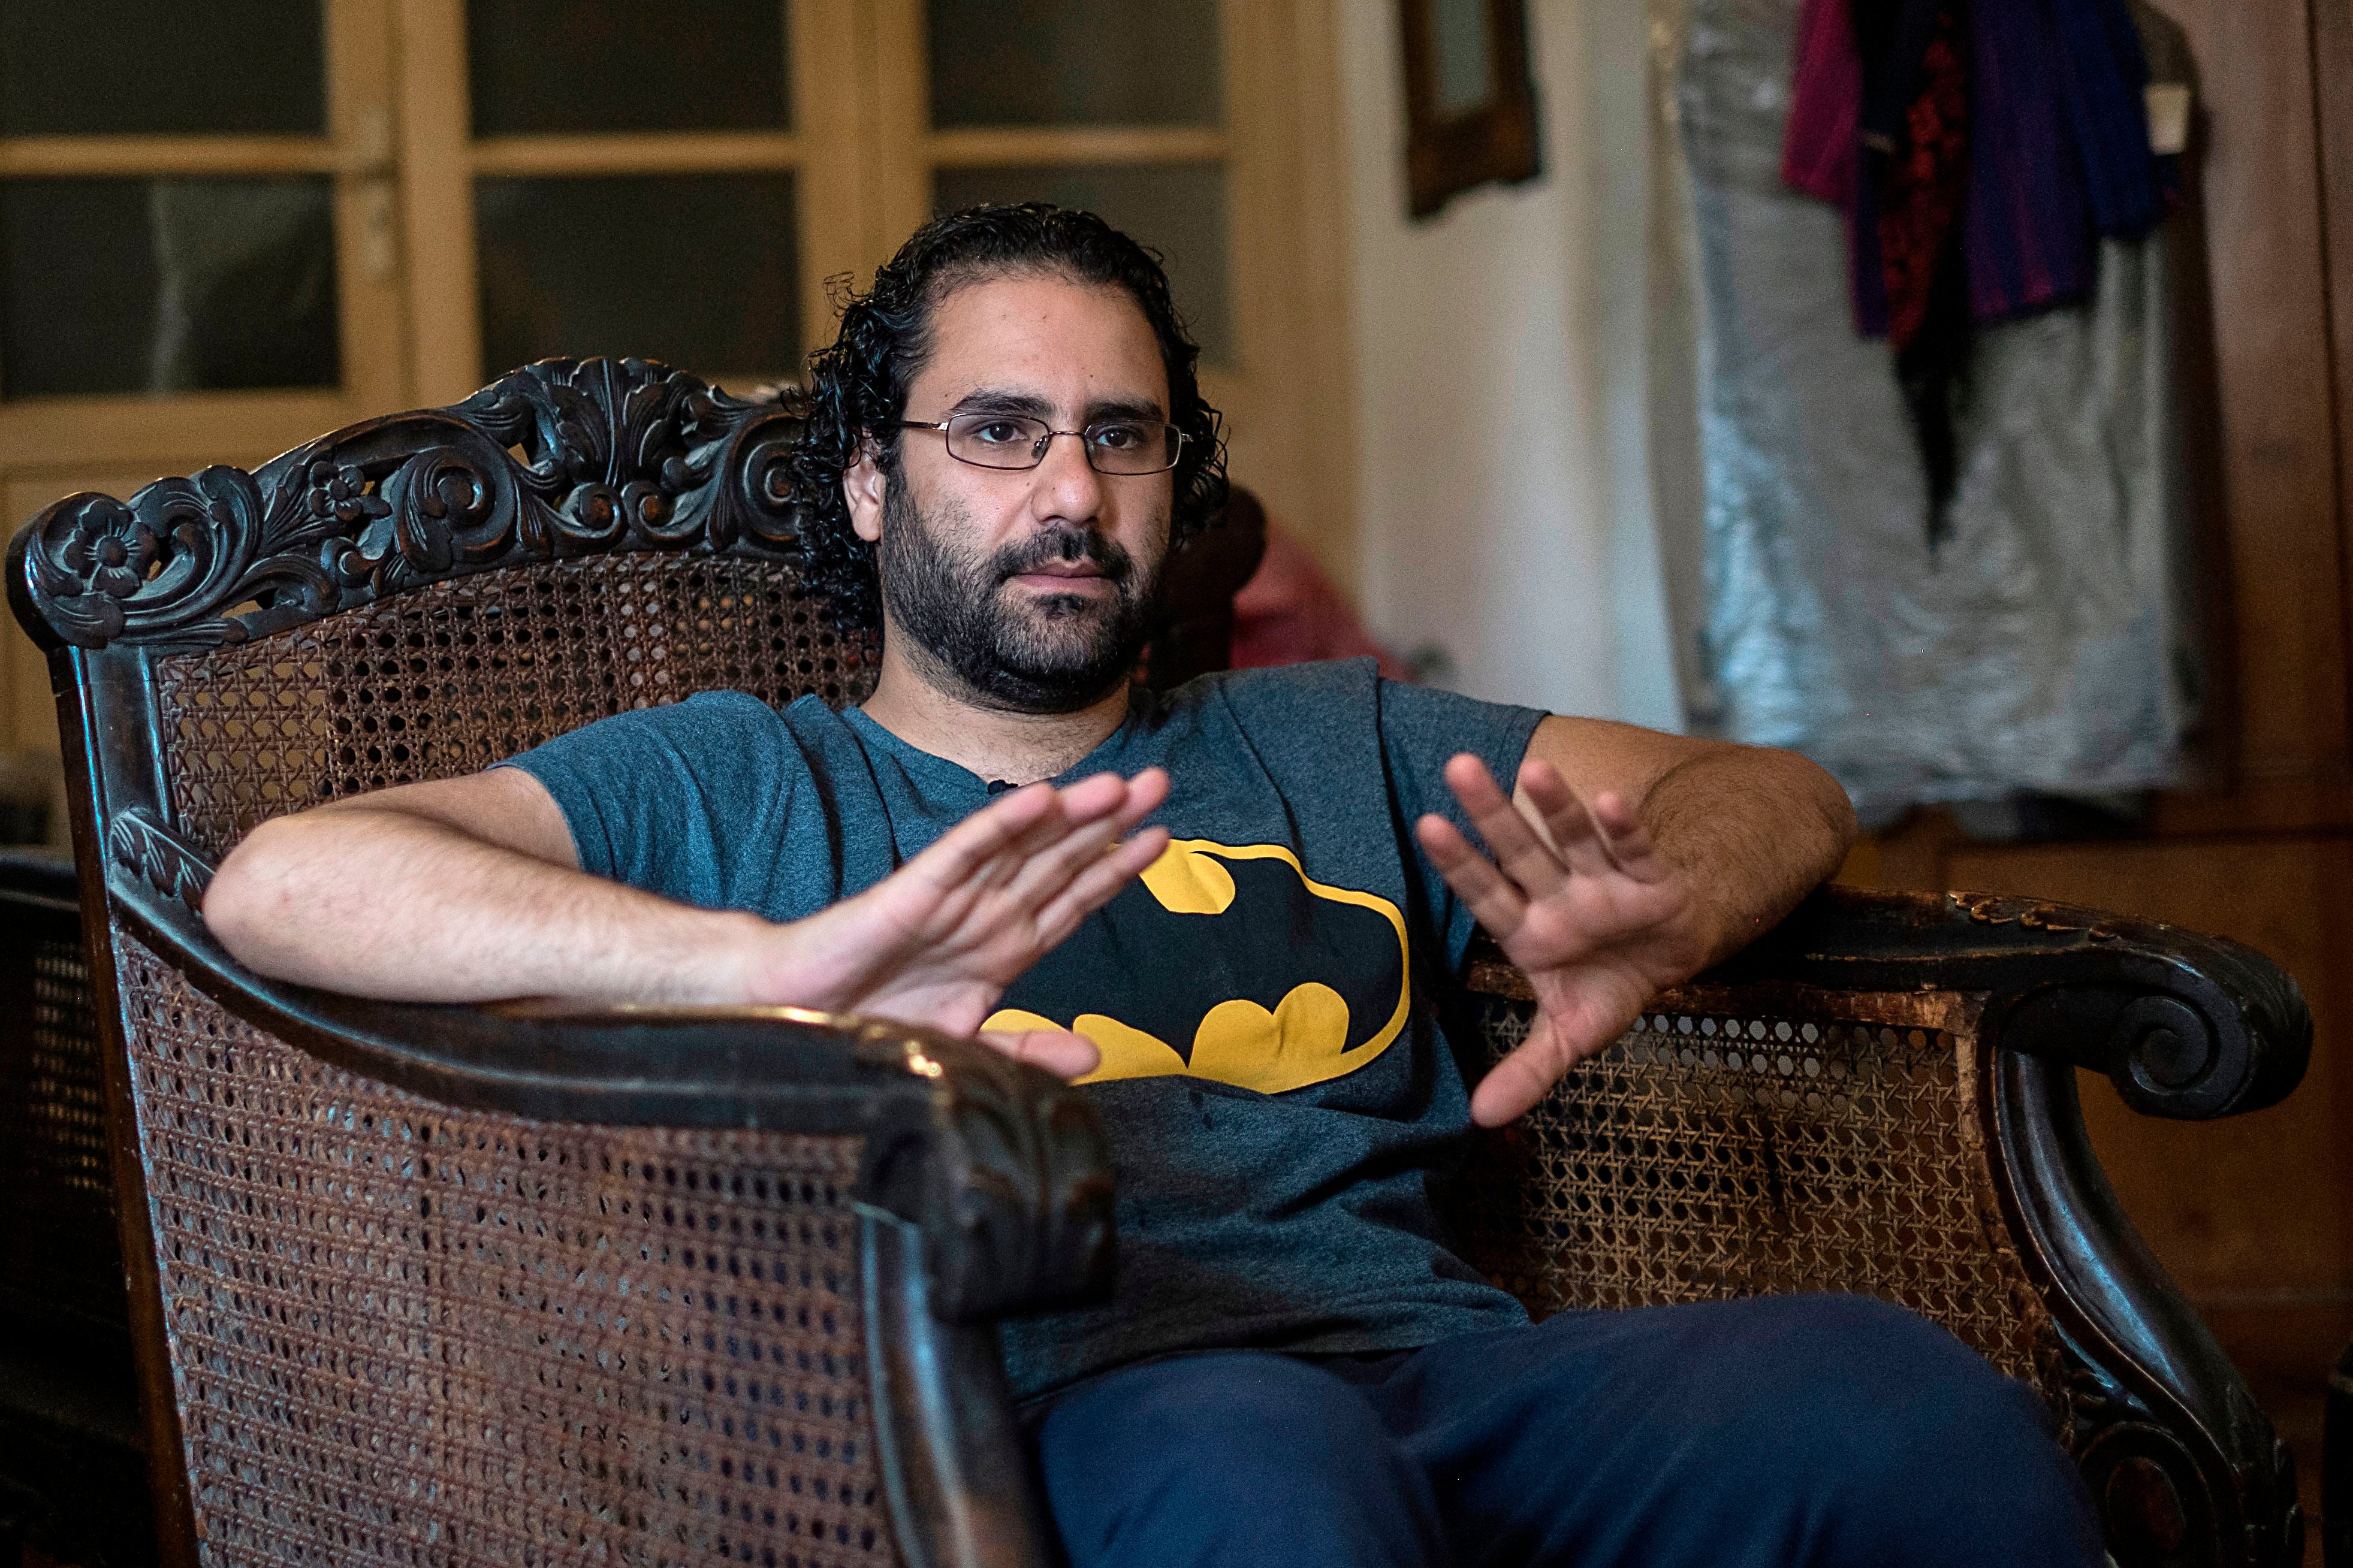 Alaa Abdel Fattah has spent most of the last decade in jail in Egypt